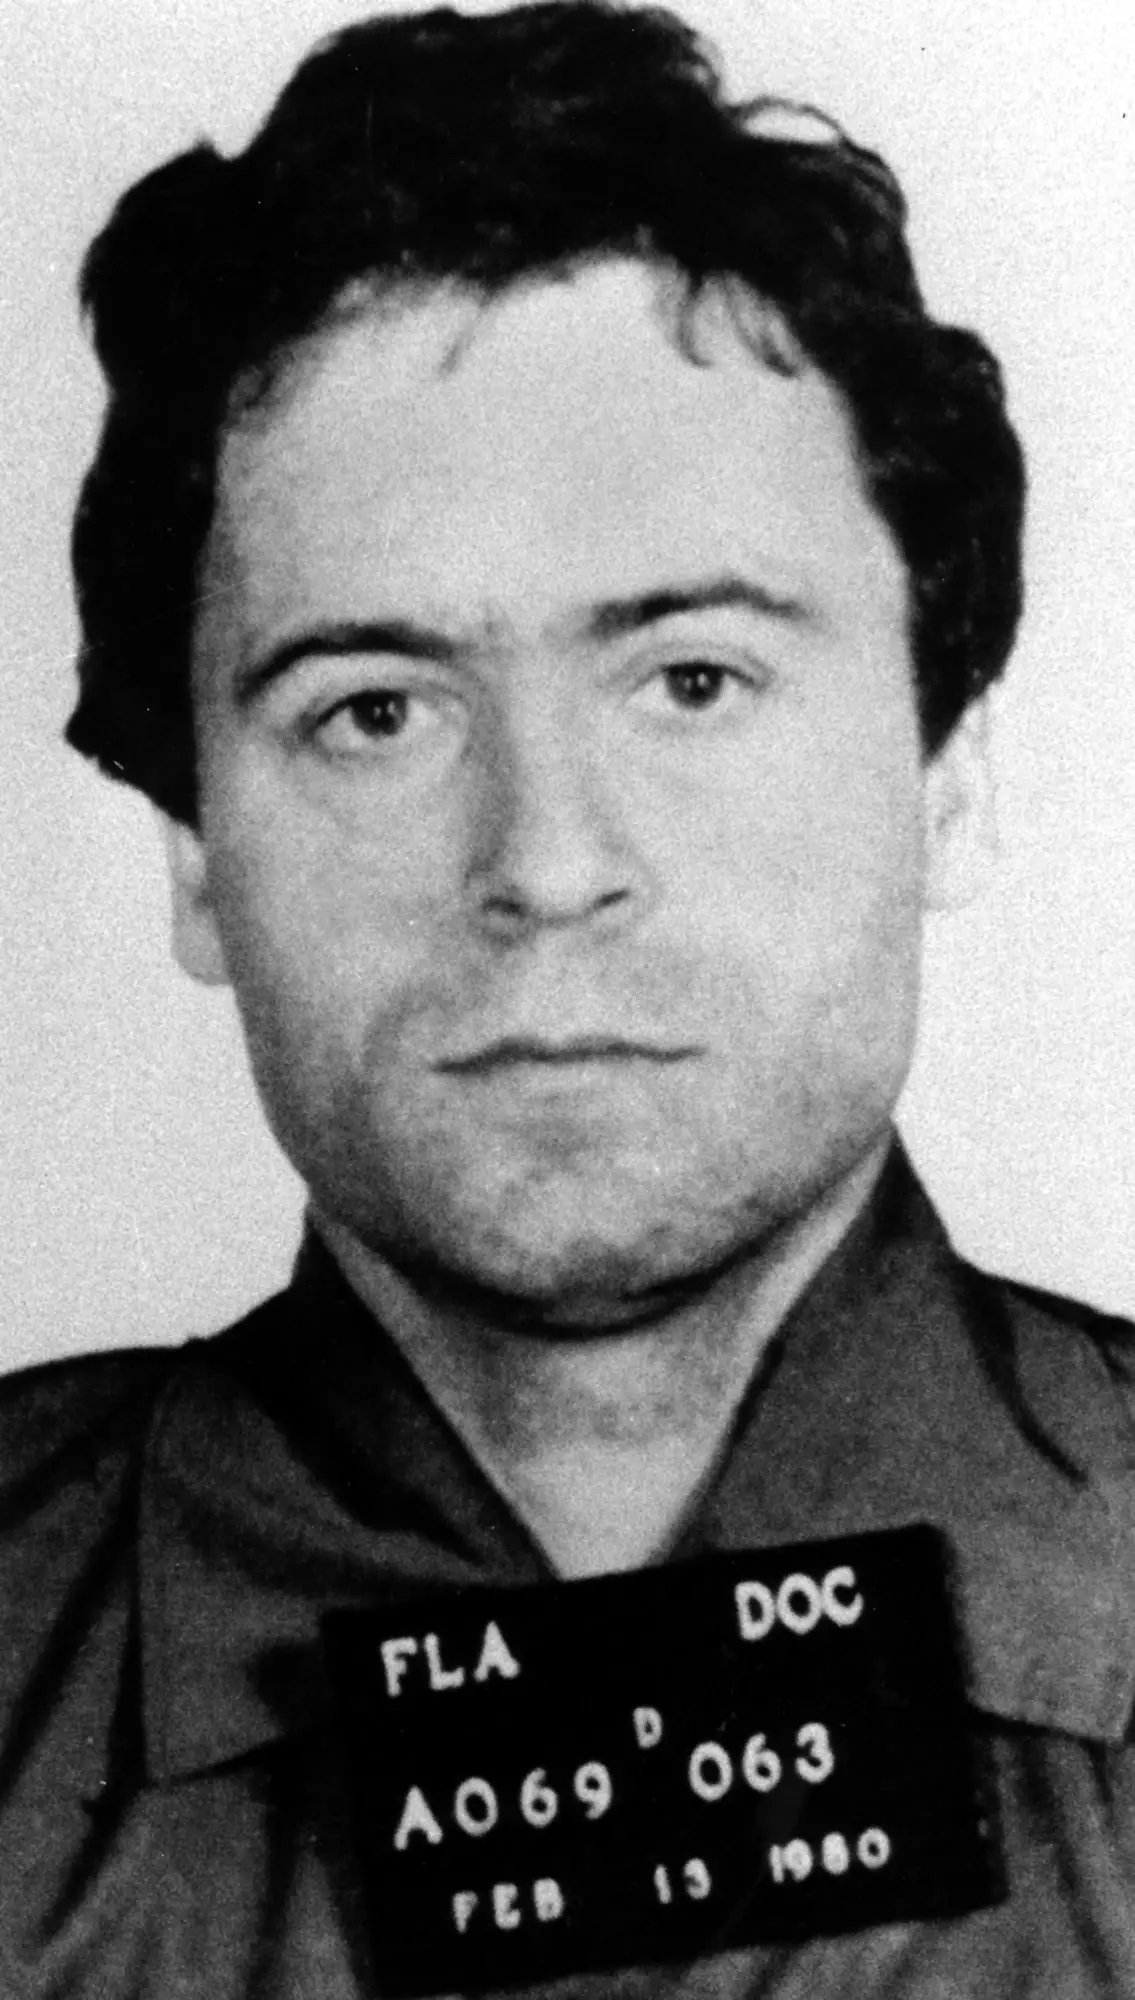 Ted Bundy following his arrest in 1980.